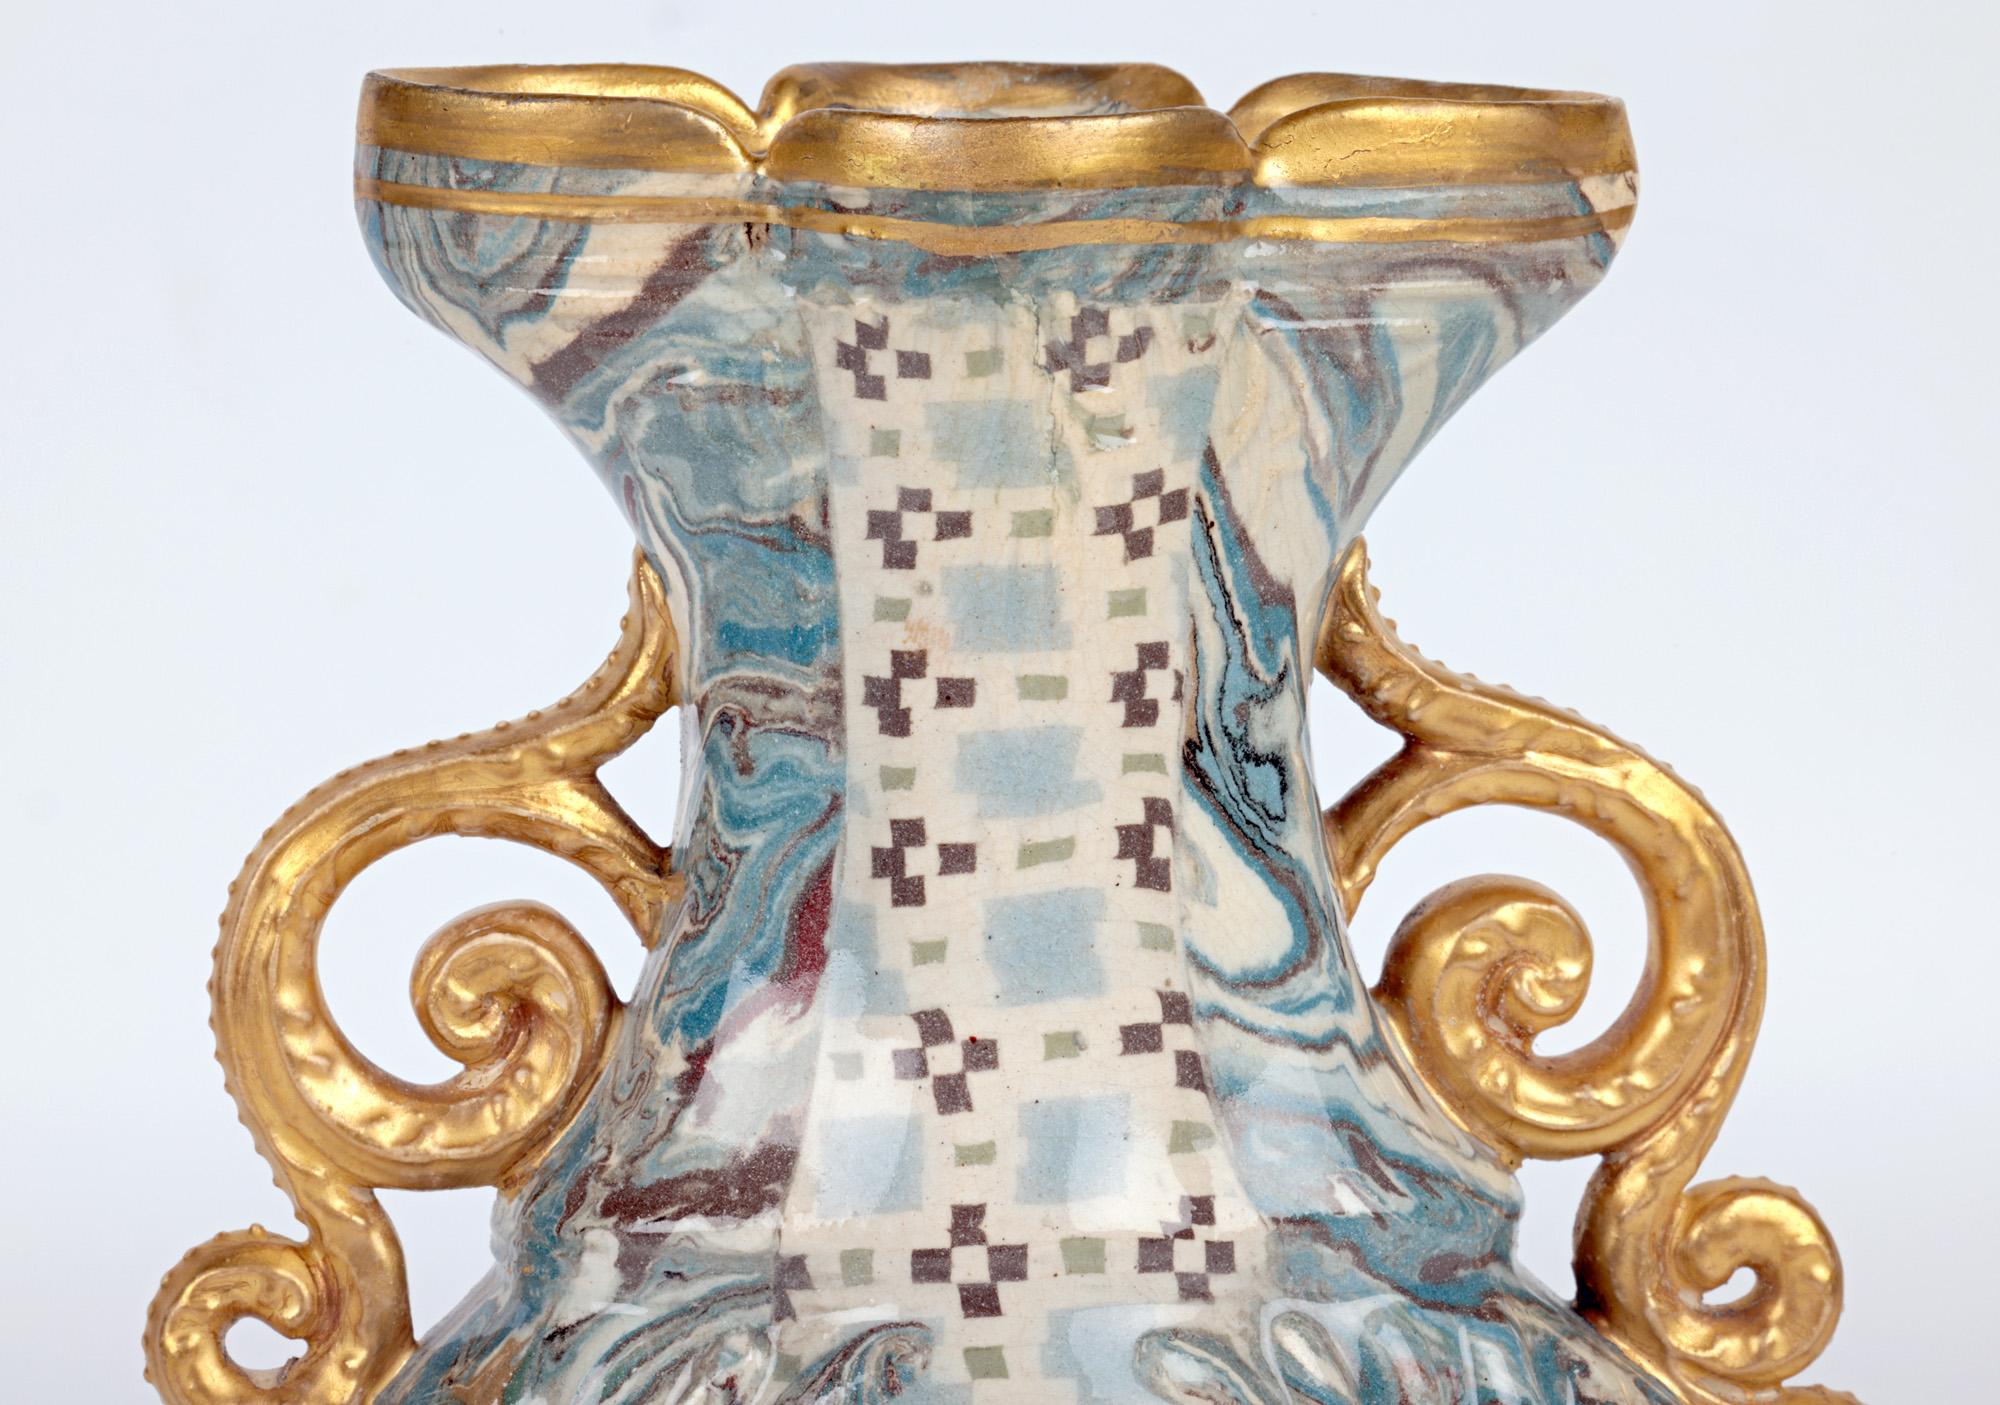 A very rare and stylish Doulton Lambeth Marqueterie Ware blue and brown marbled art pottery twin handled vase with gilded designs by Lambeth’s first Art Director Wilton Parker Rix (Doulton Lambeth 1868-1897) and dating from around 1895. 

Rix became